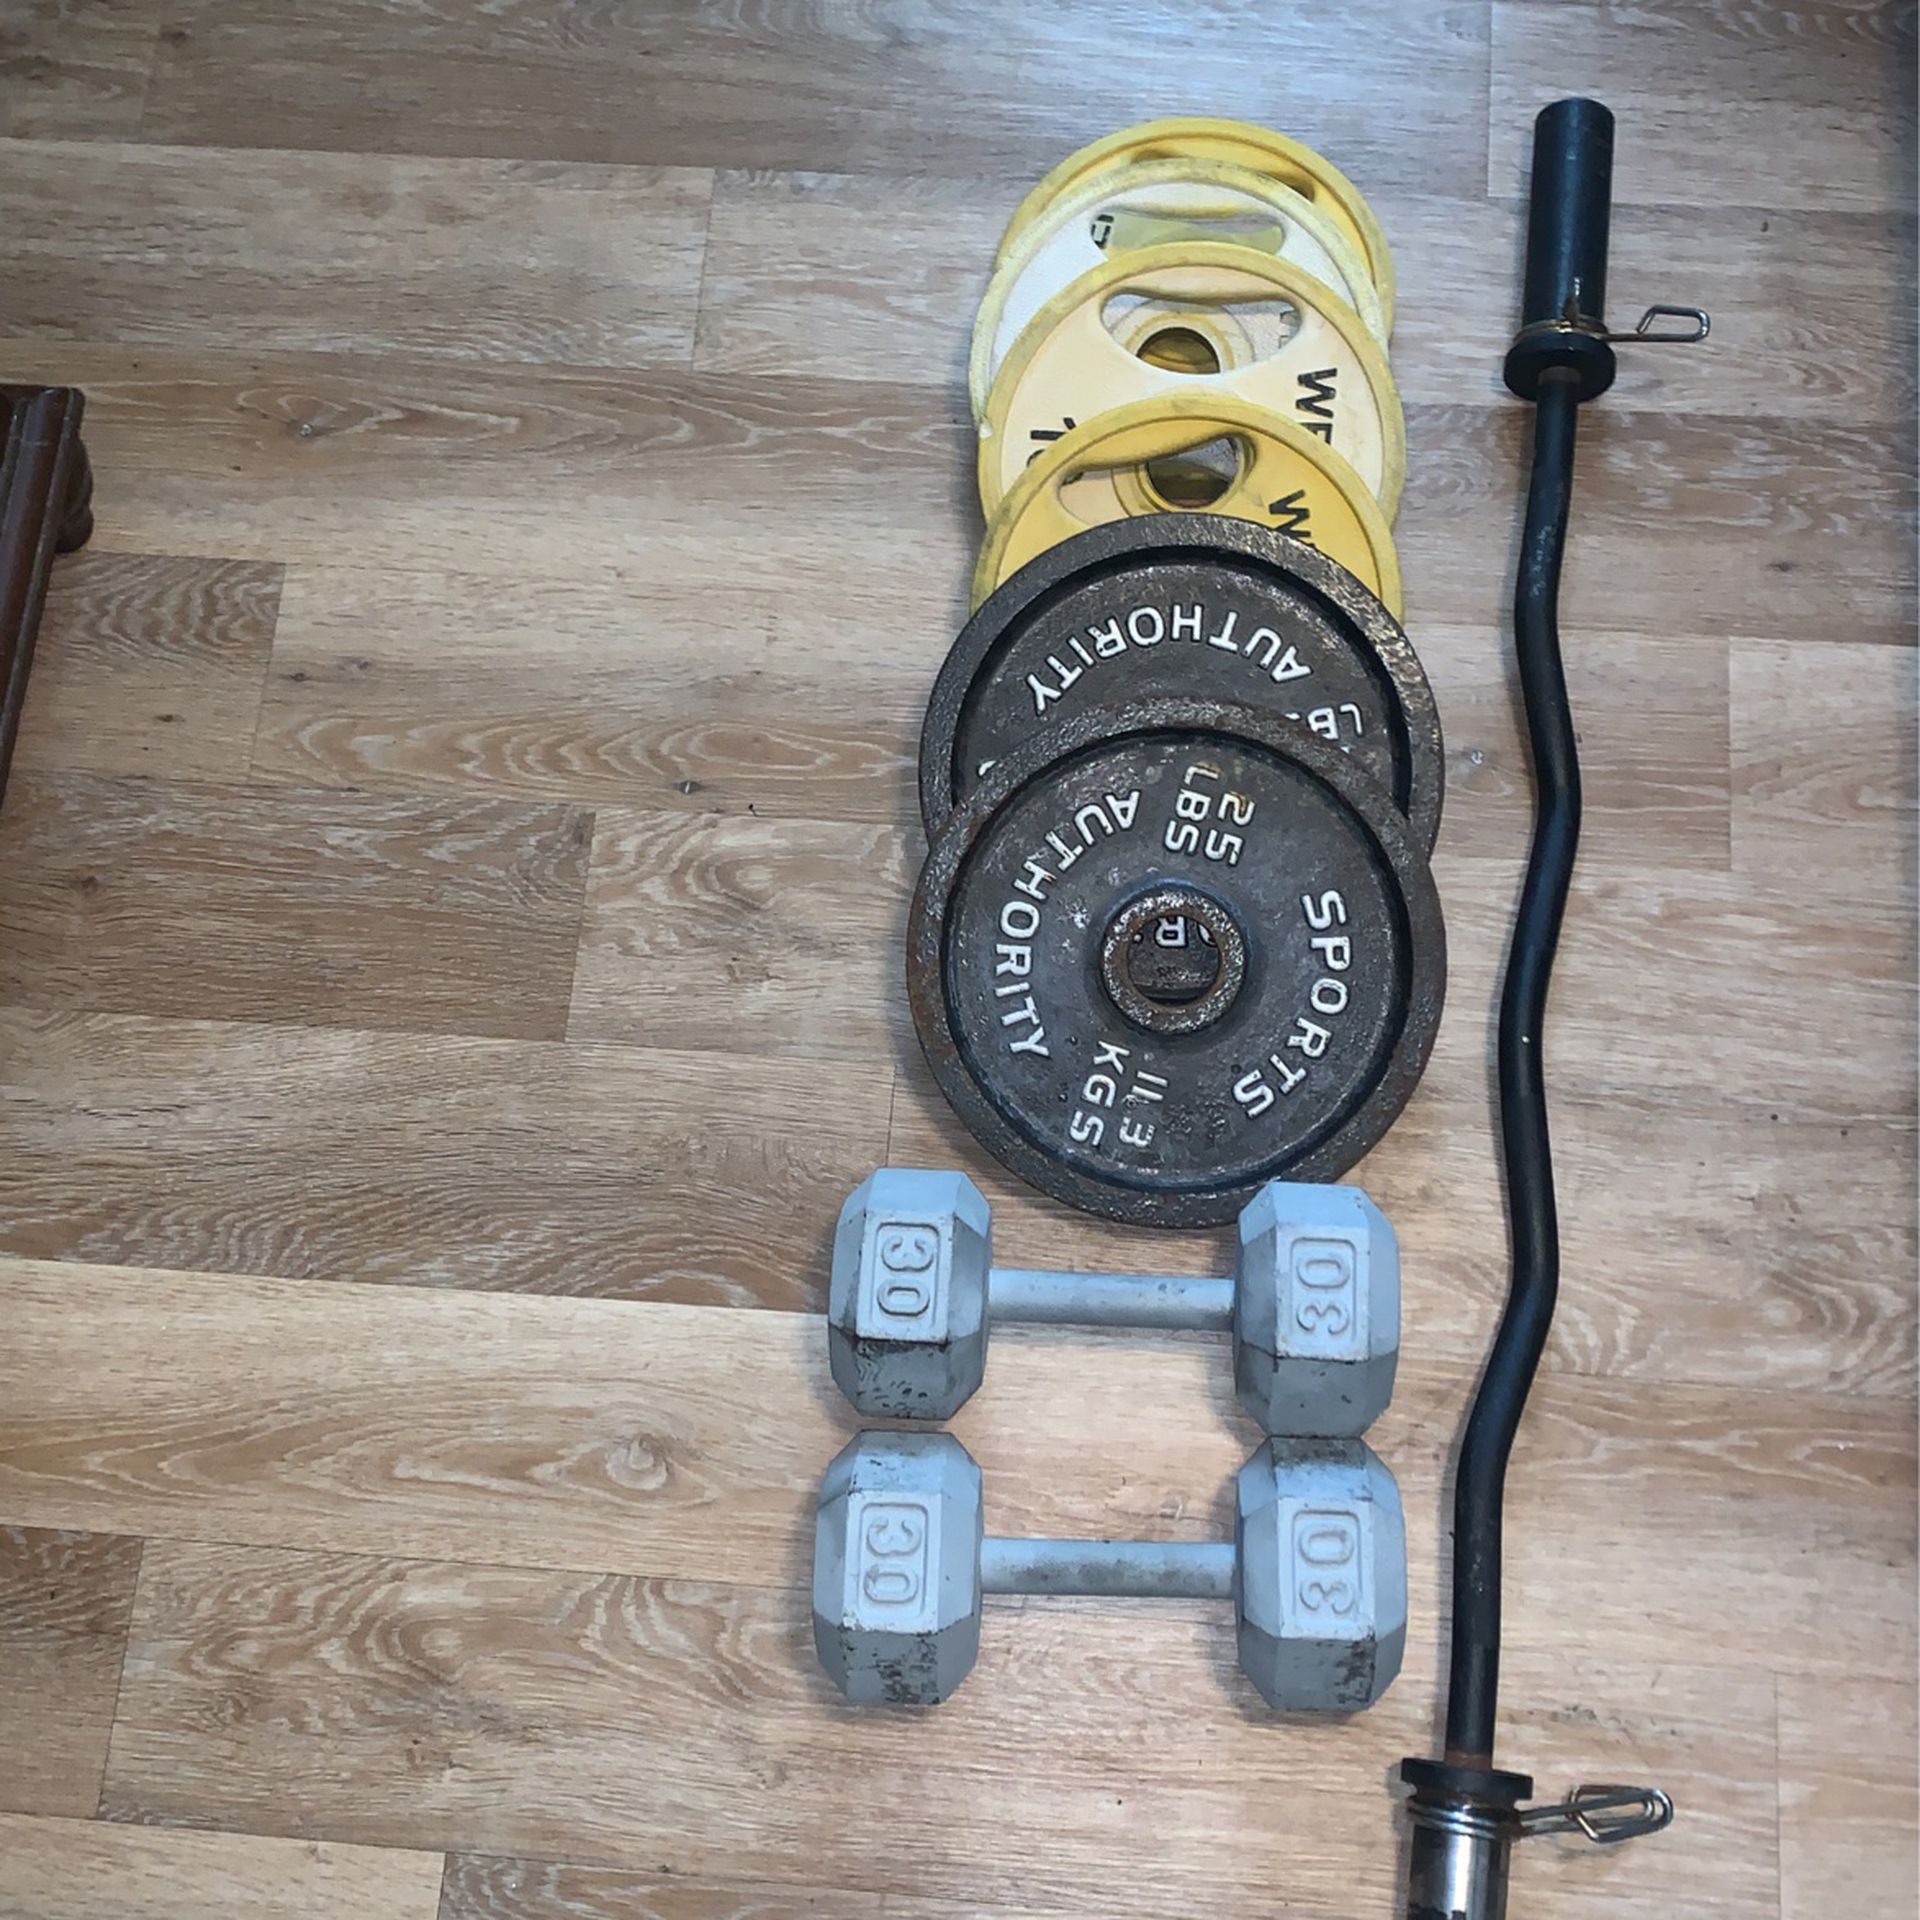 Weights And Curl Bar Best Offer Takes ‘em